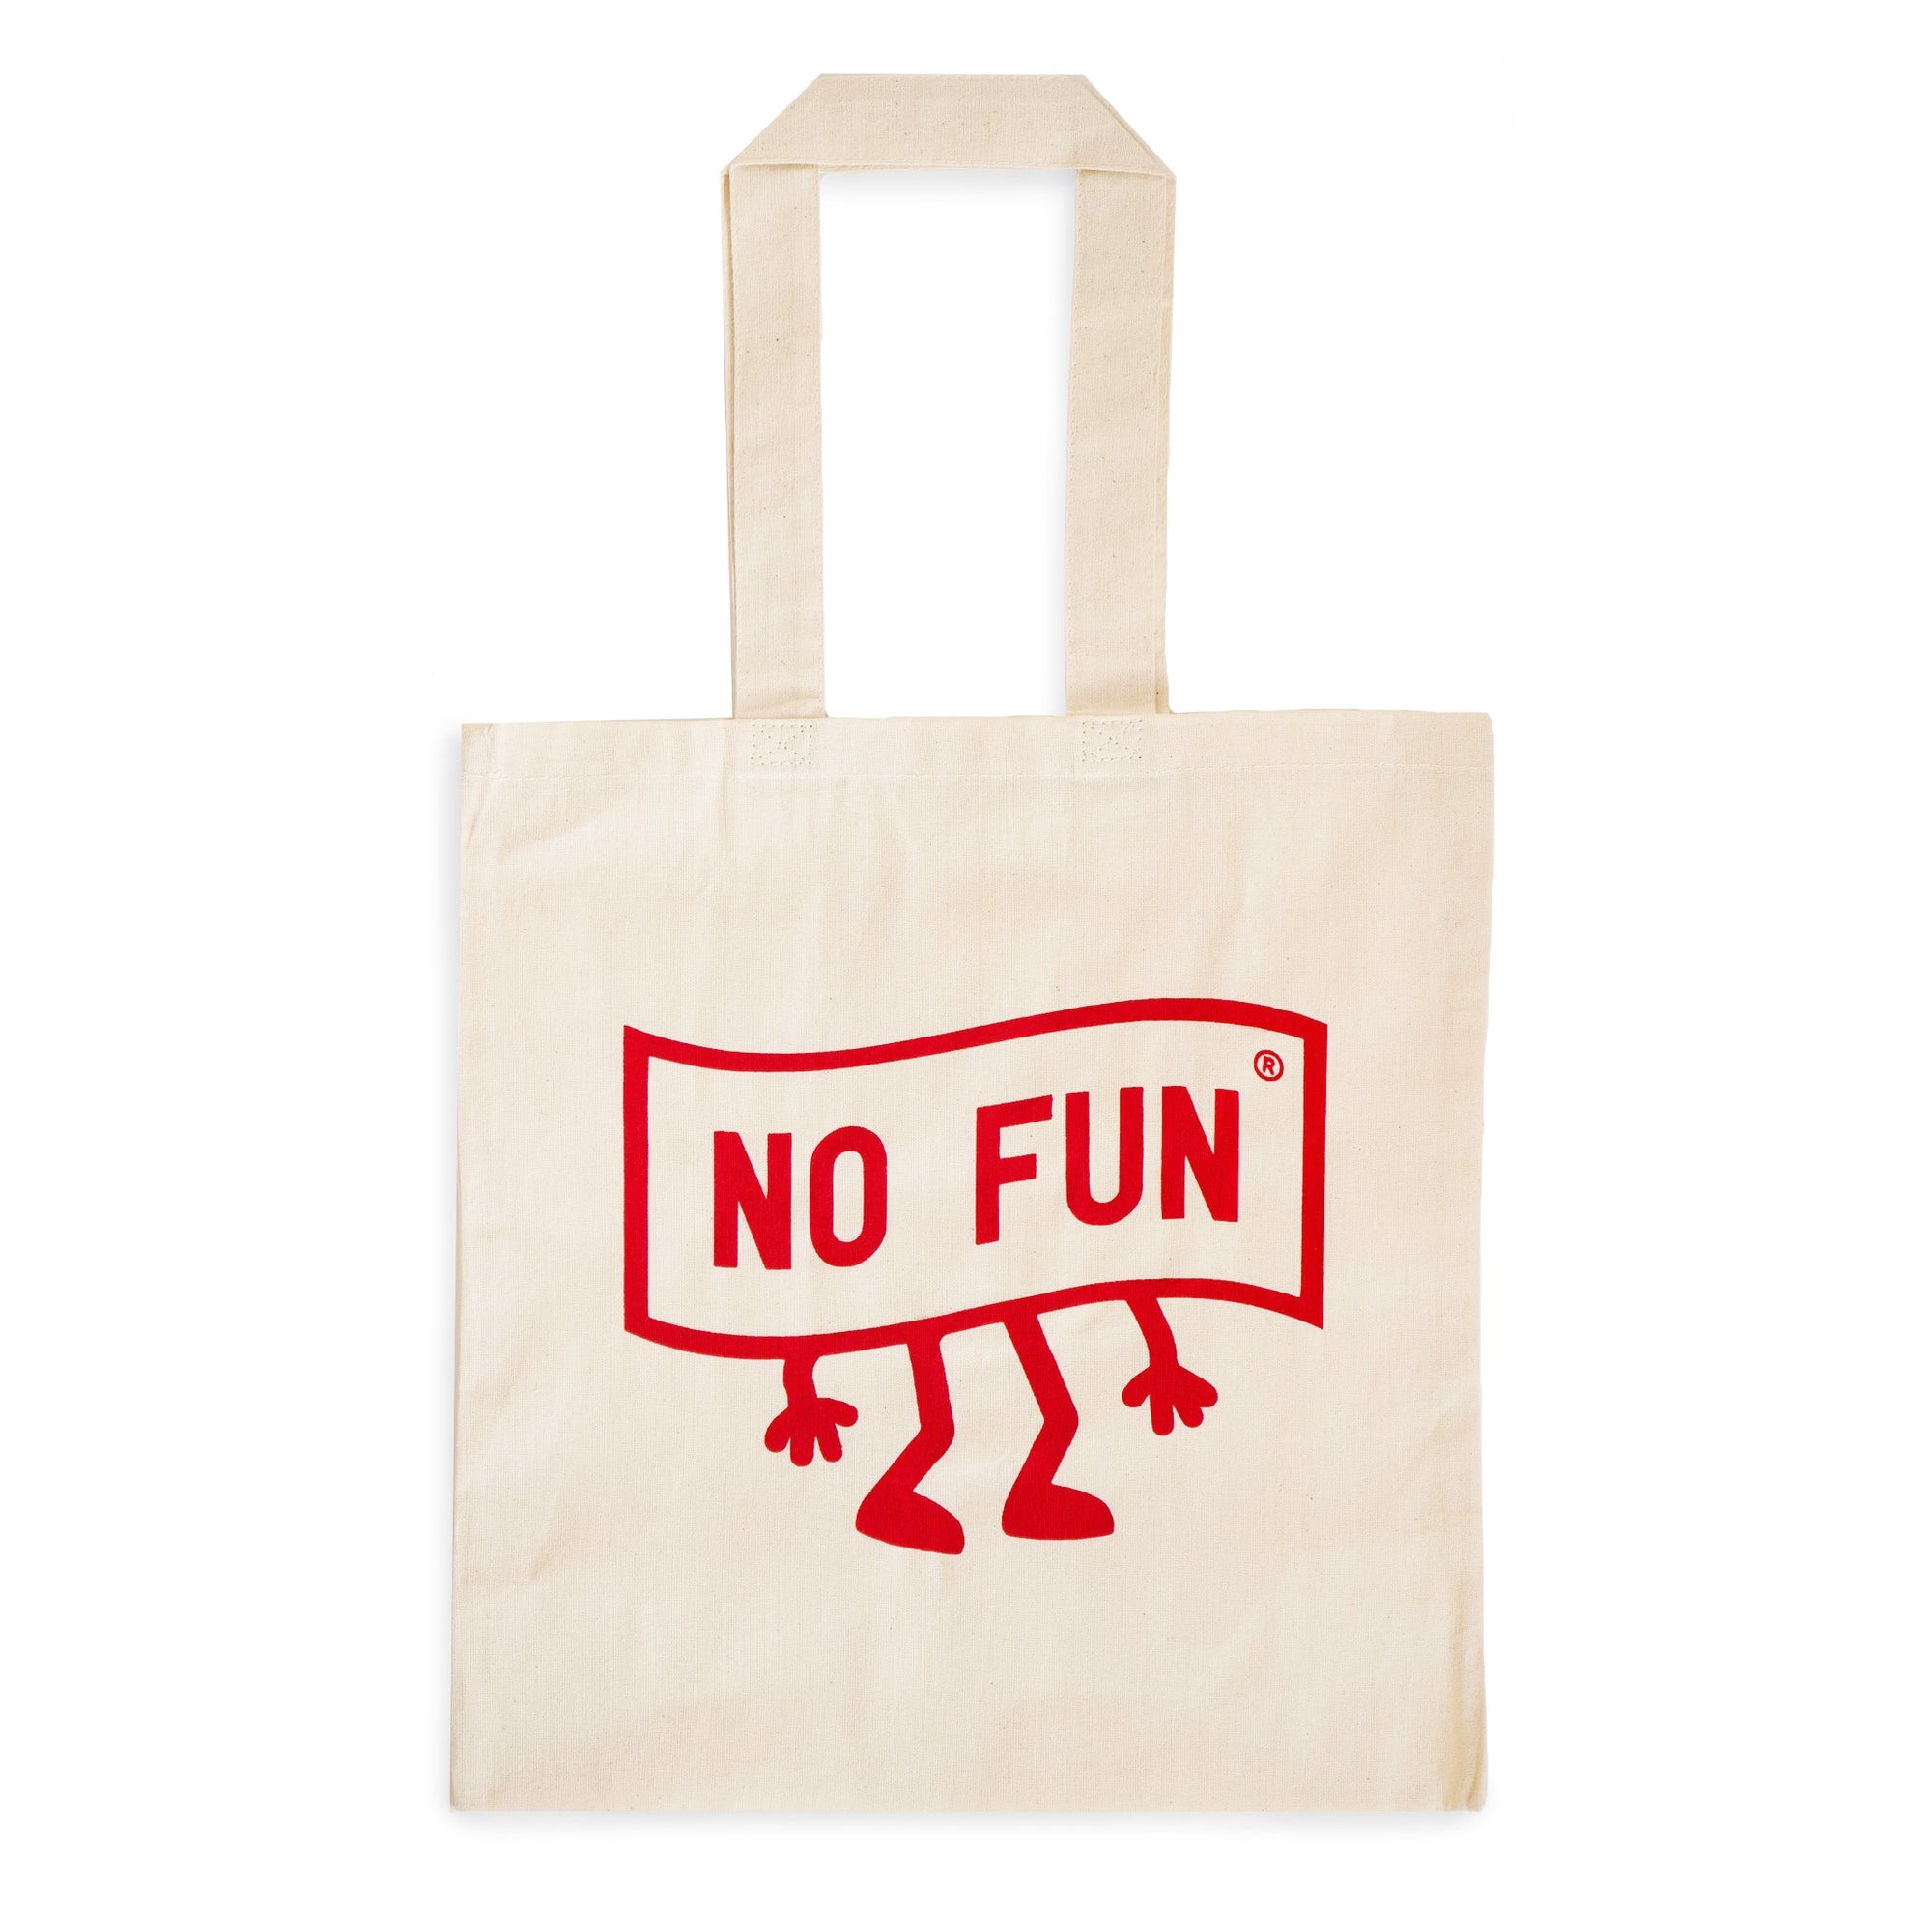 Image features a photo of the "No Fun®" Walking tote bag against a white background.  The tote bag is cream coloured, and features a large, red "No Fun®" logo in a banner shape.  The logo also has hands and feet attached in the same colour, implying that the logo has human likeness.